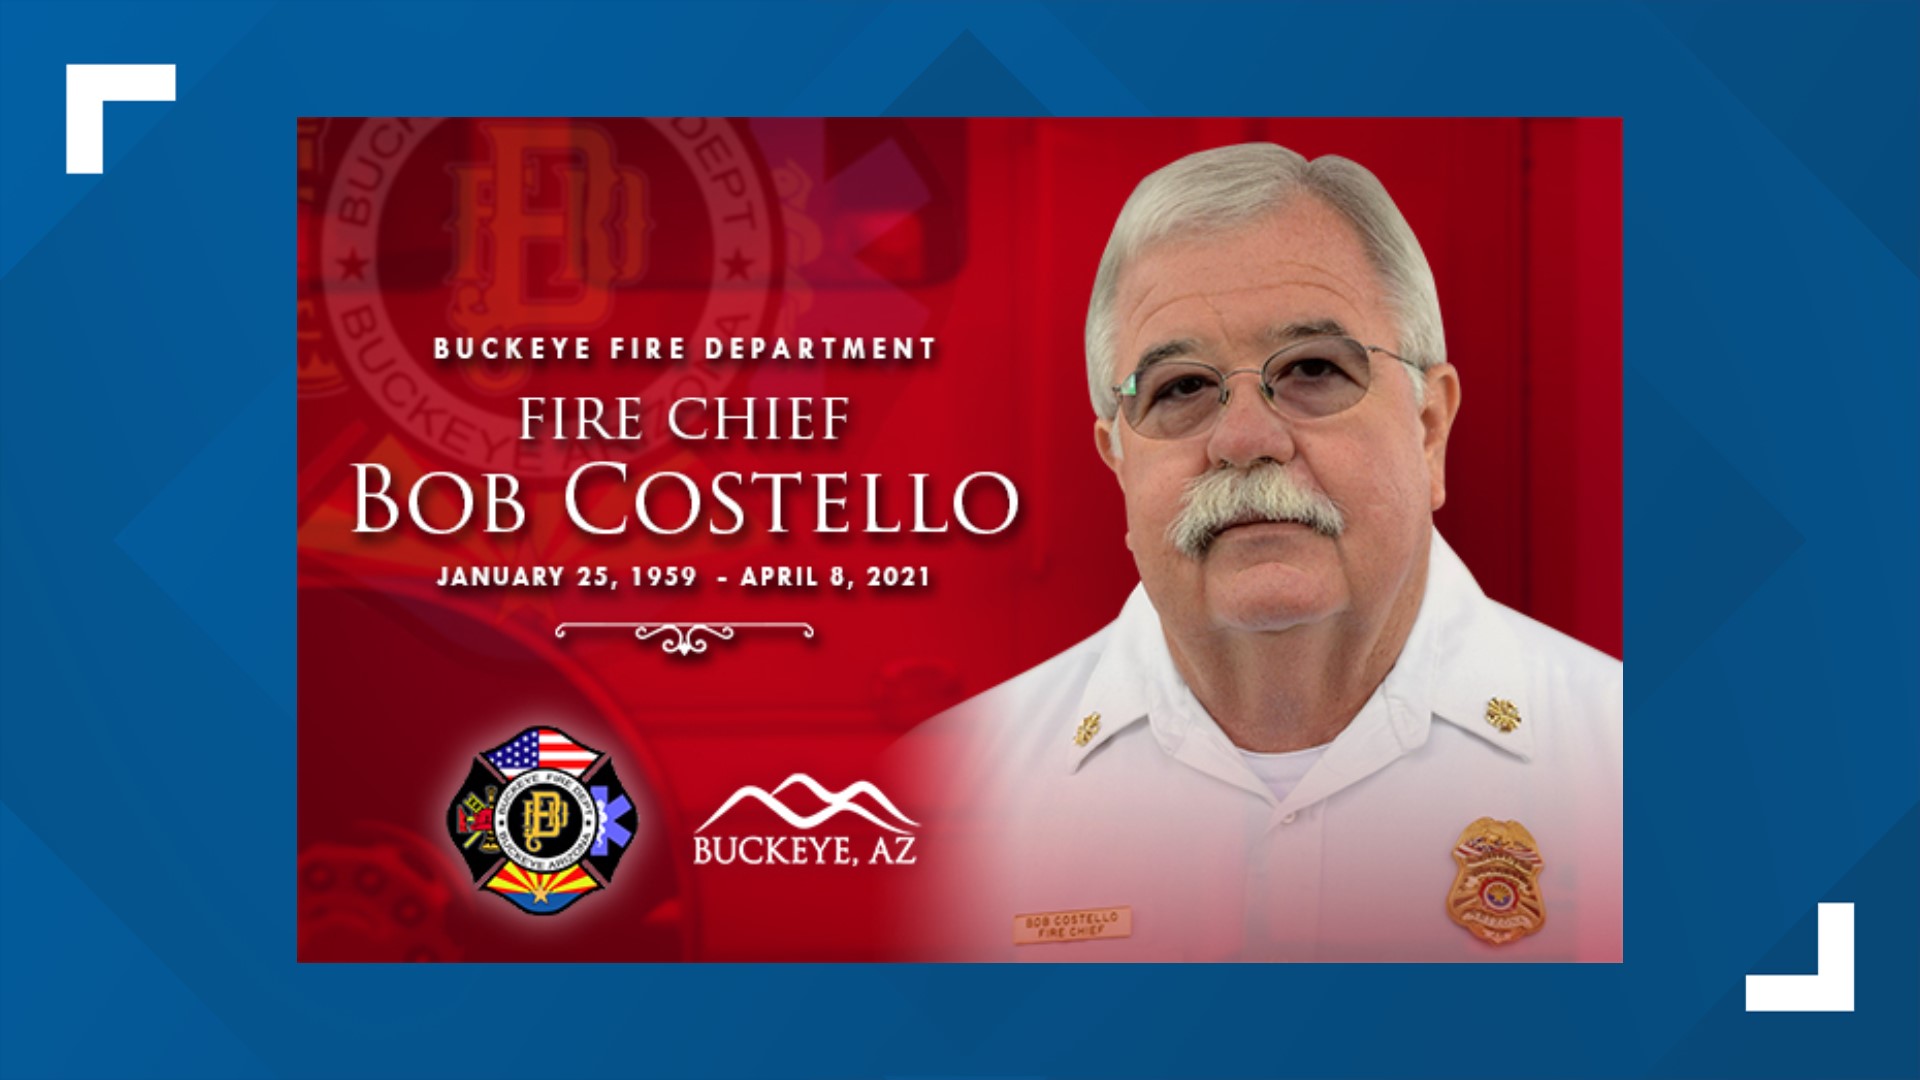 Family and friends of Buckeye Fire Chief Bob Costello gathered to honor Costello's life. He loved his community, his team and above all else, was their friend.